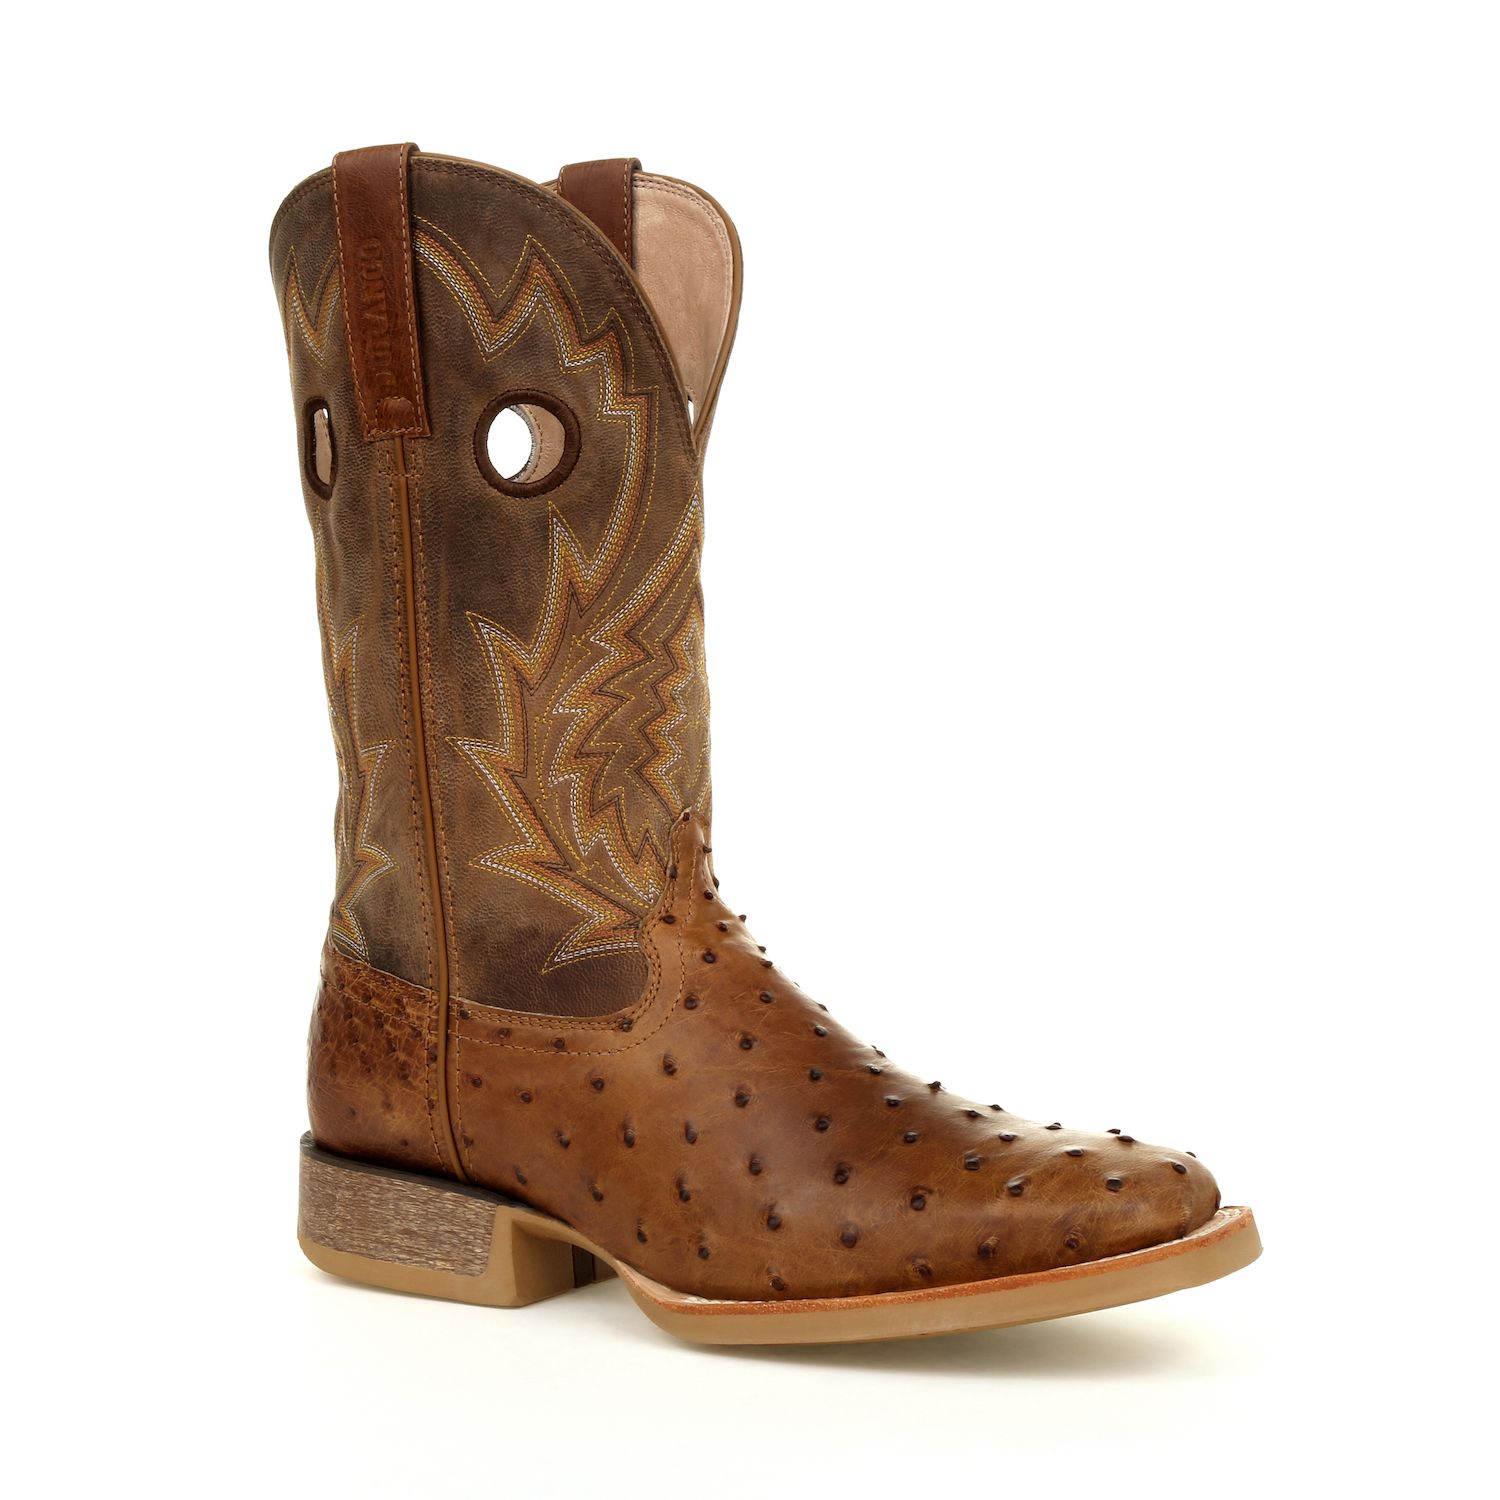 Image for Durango Rebel Pro Full-Quill Ostrich Men's Western Boots at Kohl's.